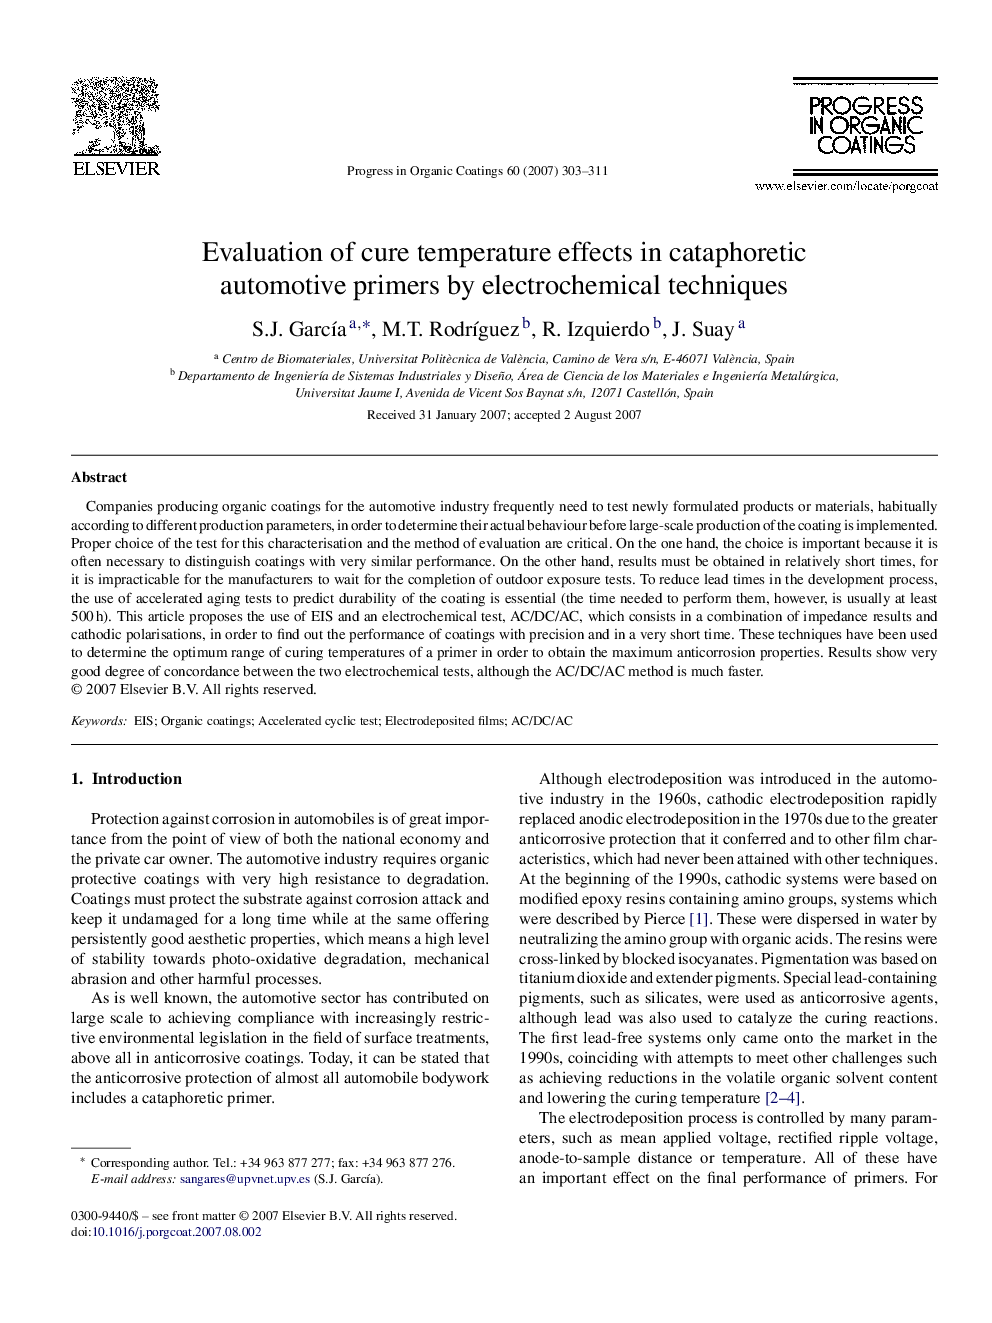 Evaluation of cure temperature effects in cataphoretic automotive primers by electrochemical techniques